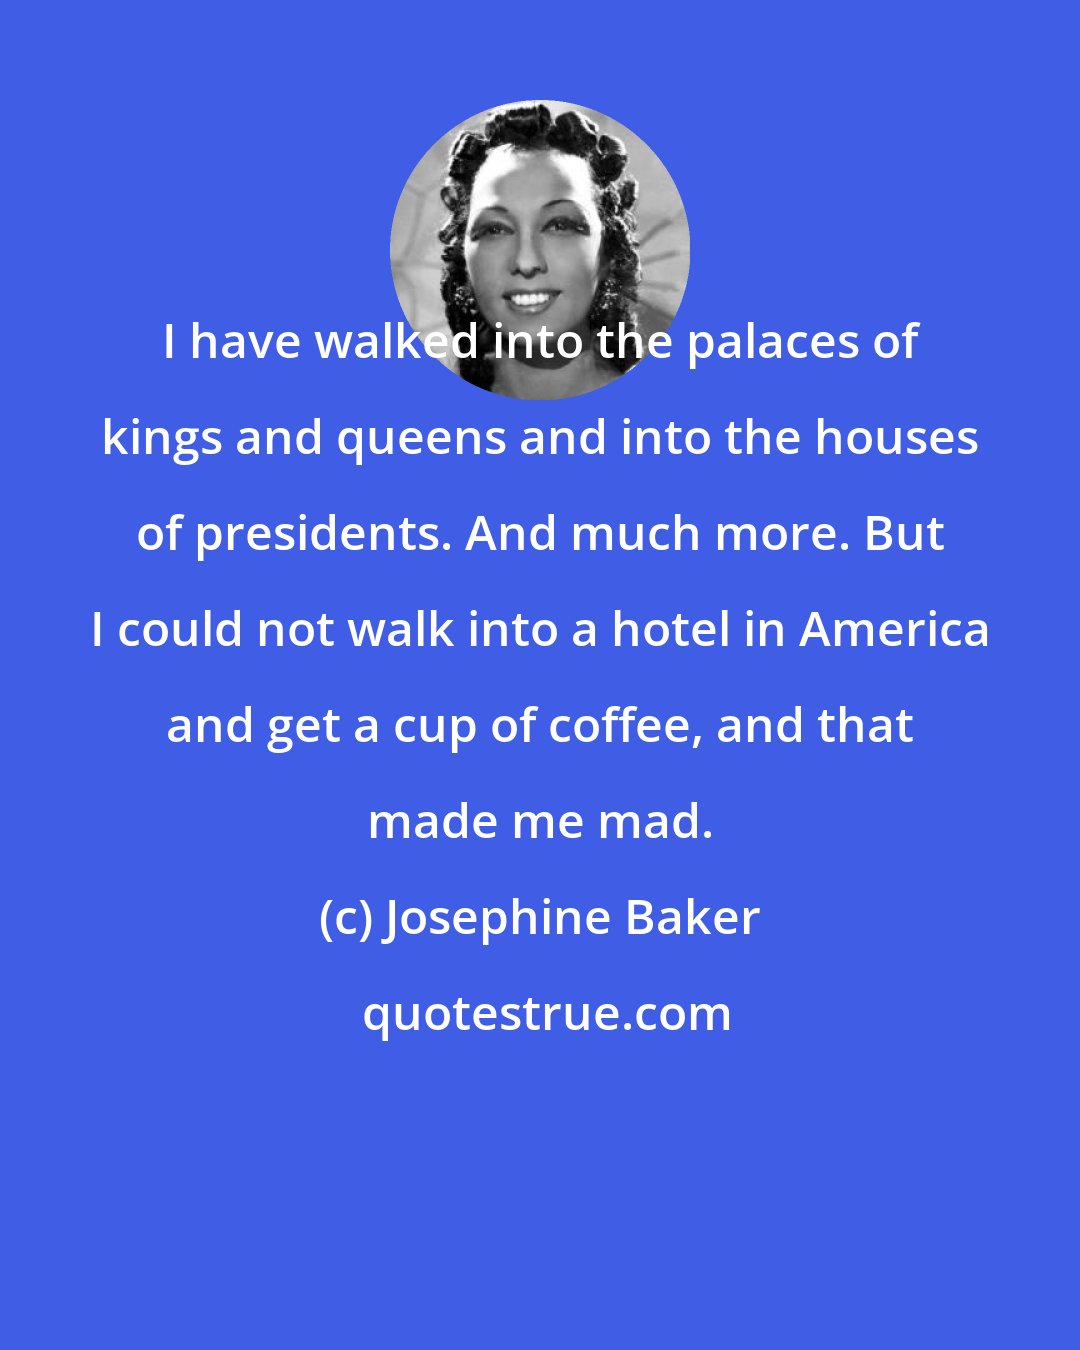 Josephine Baker: I have walked into the palaces of kings and queens and into the houses of presidents. And much more. But I could not walk into a hotel in America and get a cup of coffee, and that made me mad.